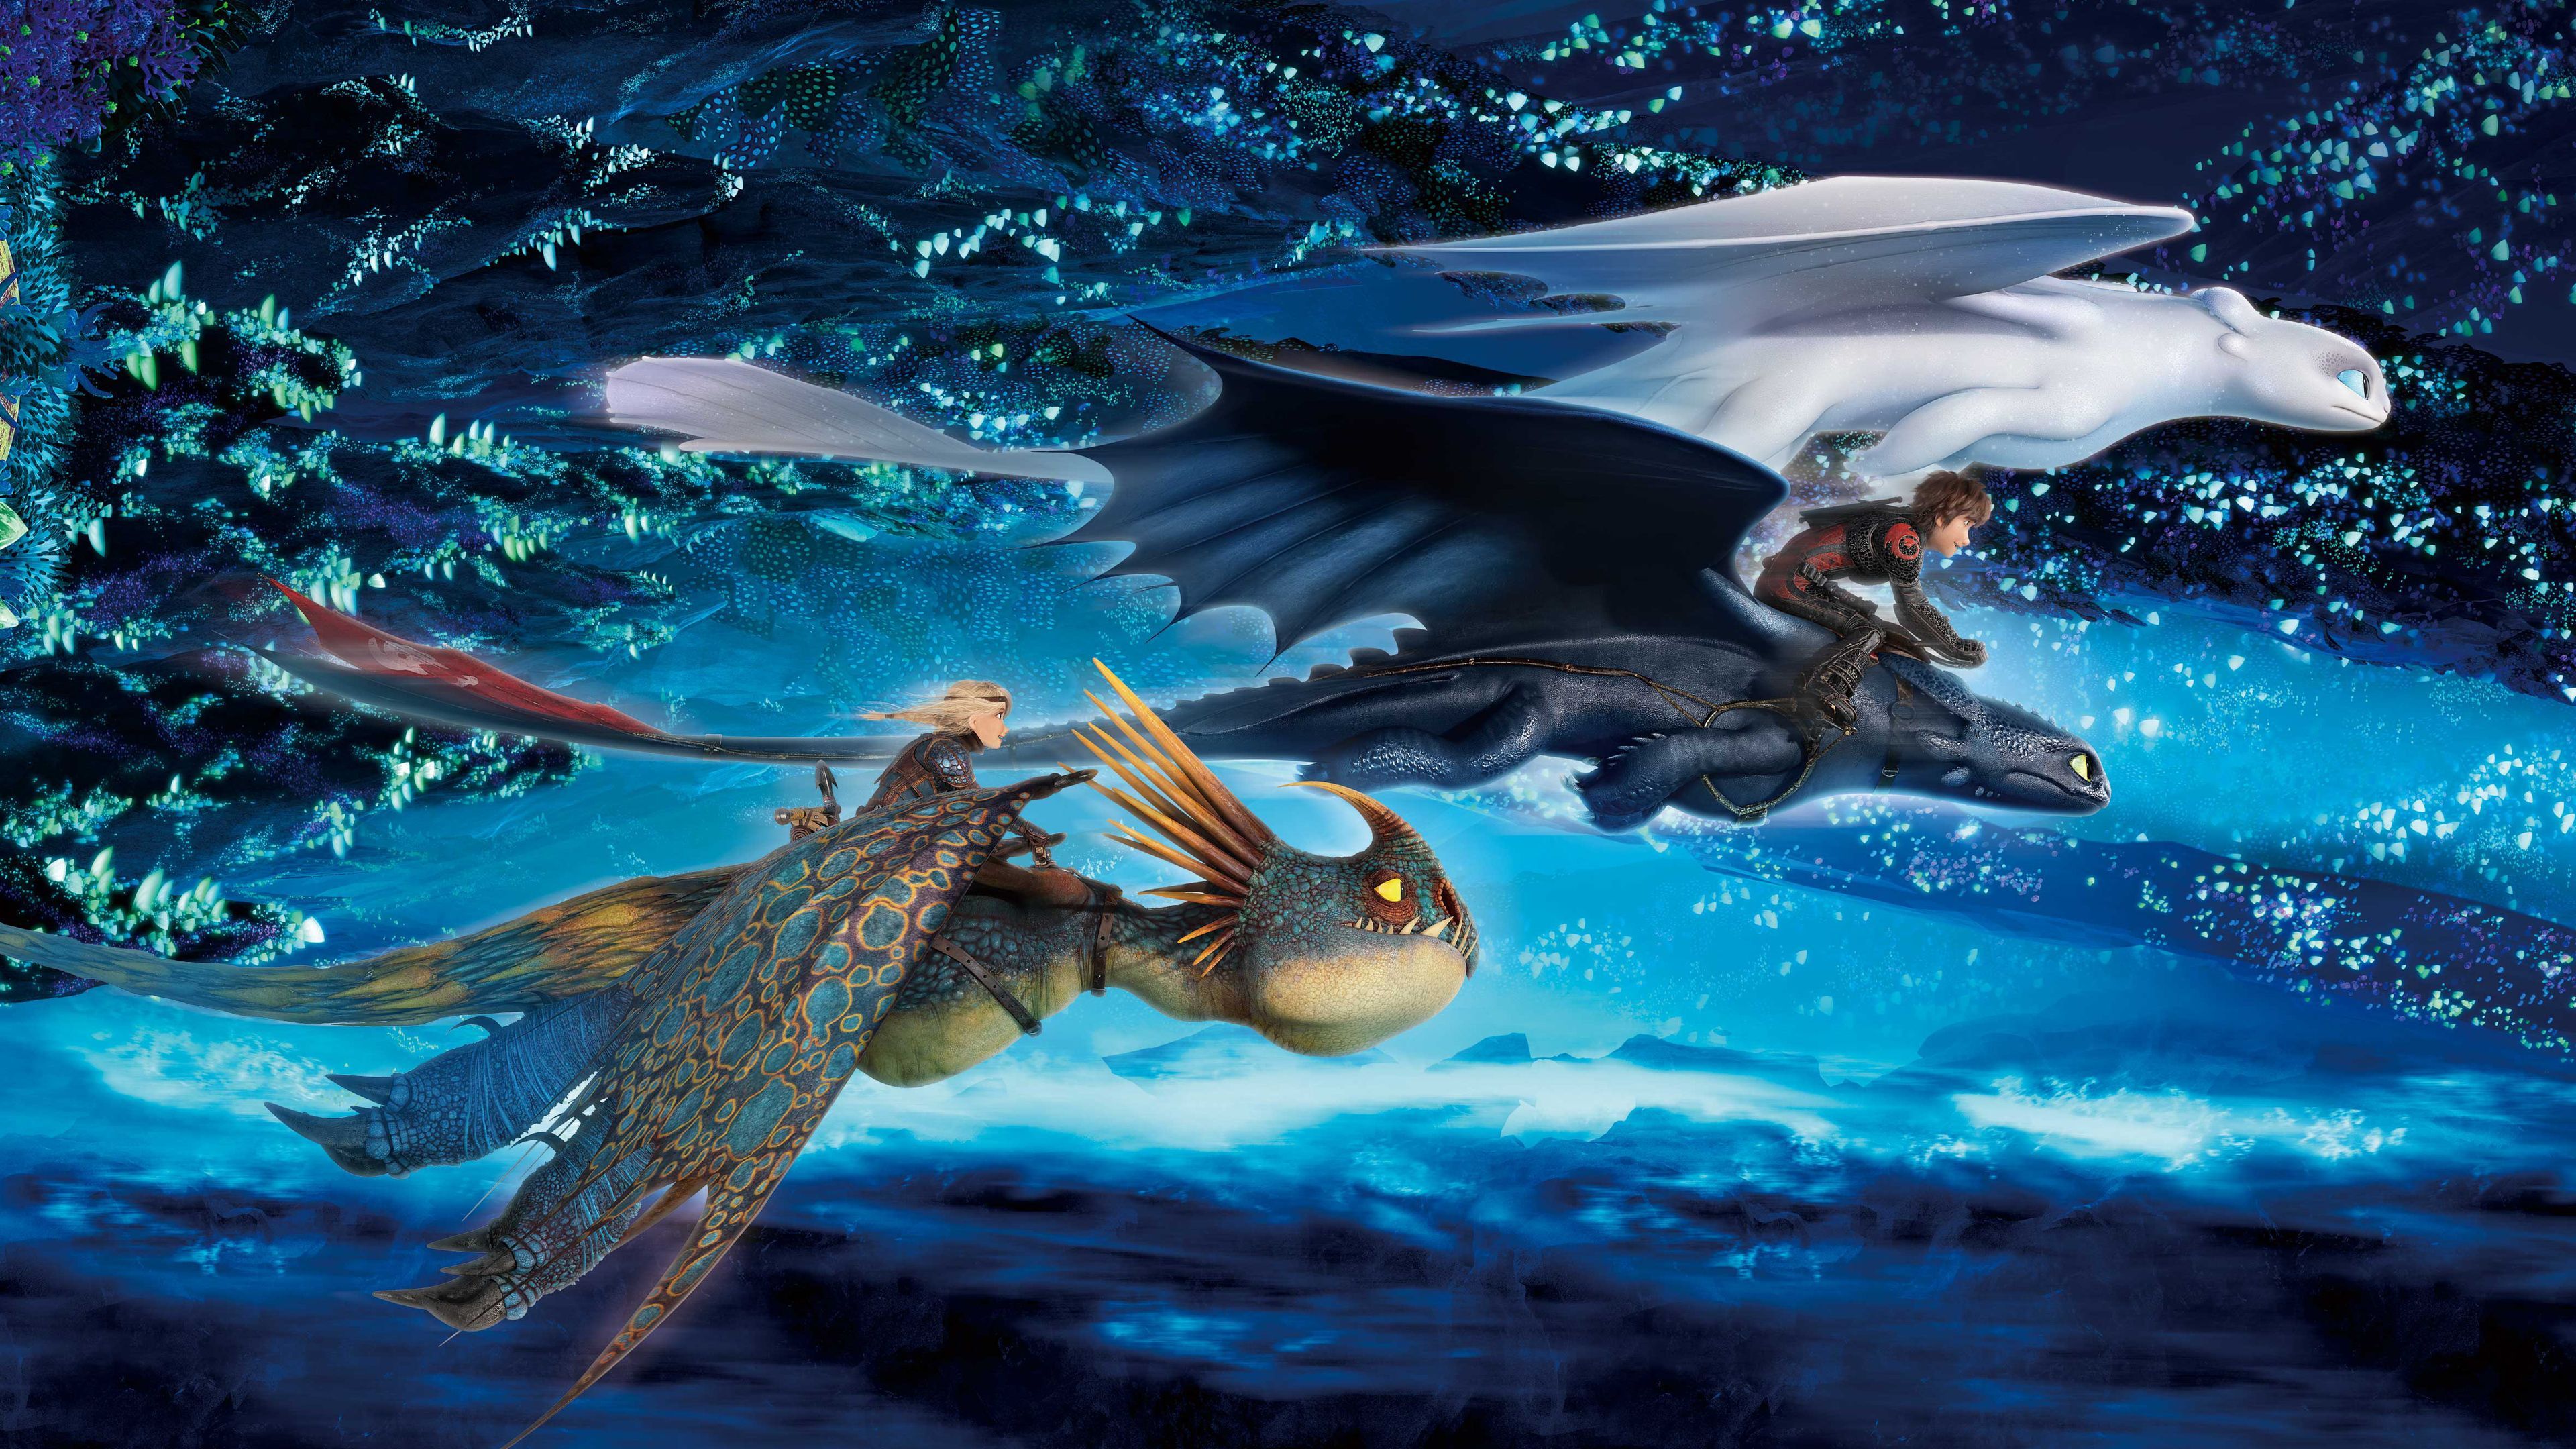 How To Train Your Dragon The Hidden World Imax movies wallpaper, light fury wallpaper, how. How train your dragon, How to train your dragon, How to train dragon